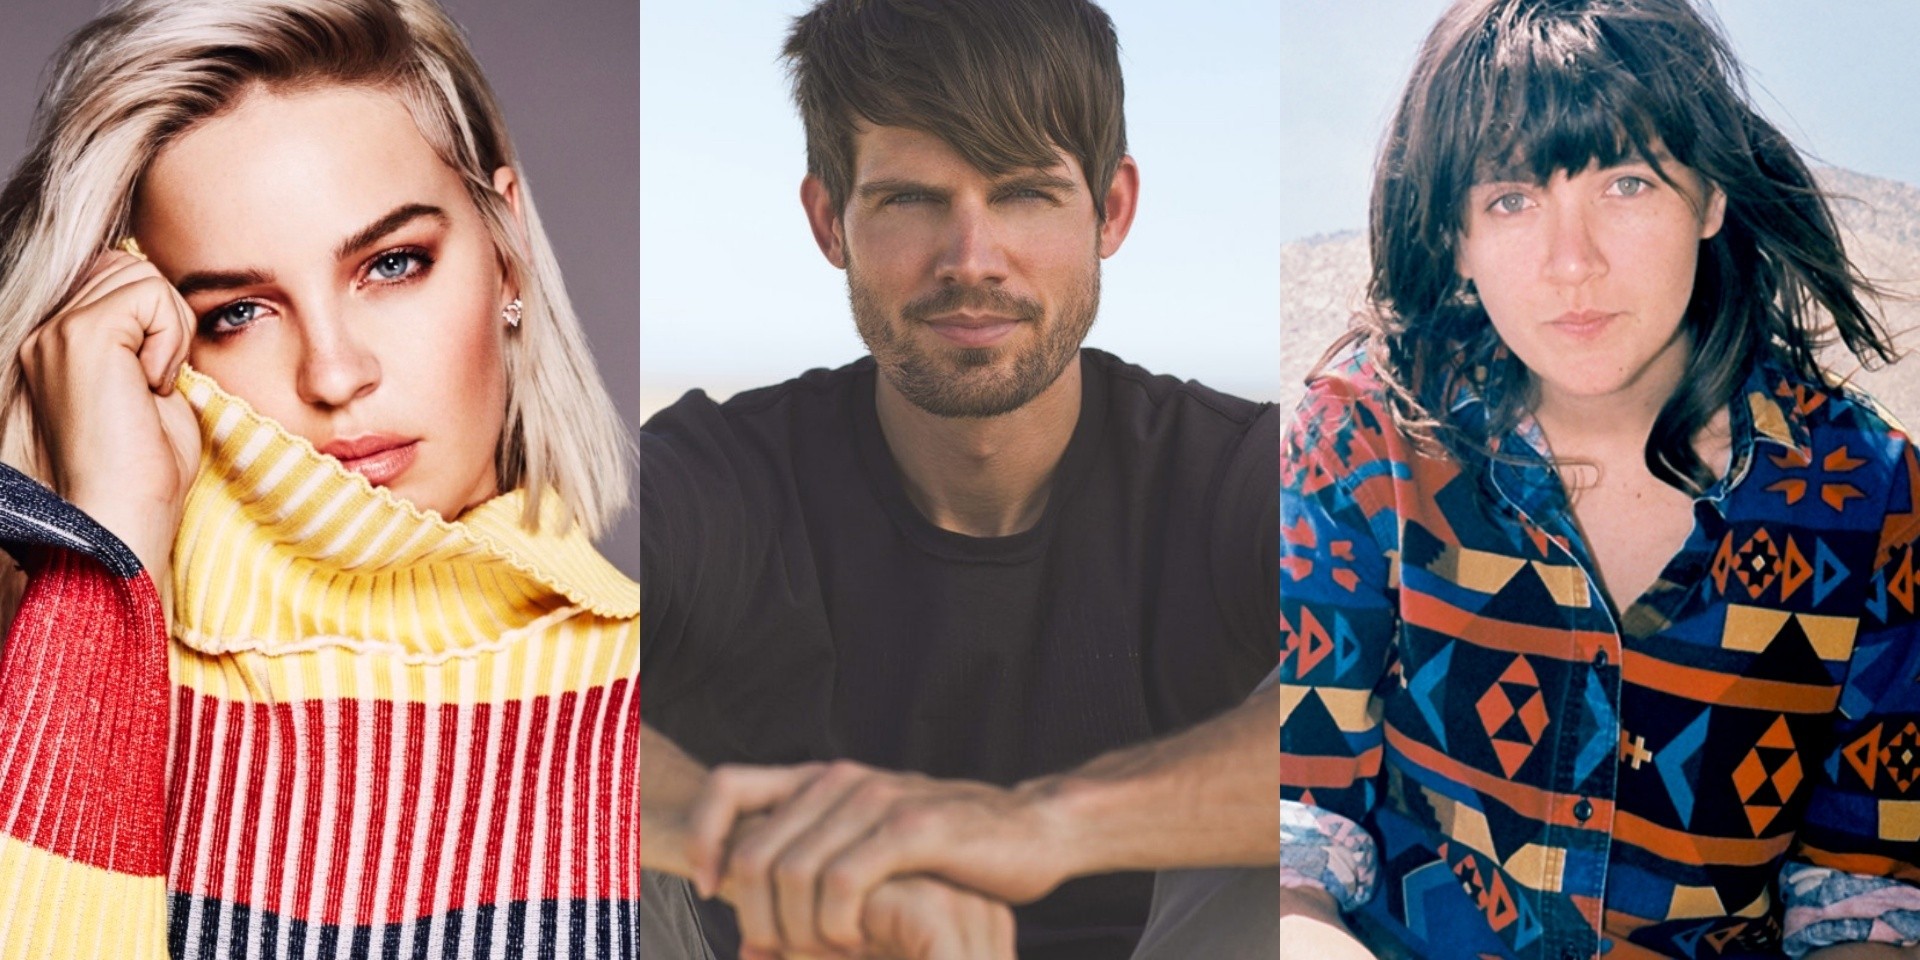 Fuji Rock Festival 2019 announces second wave lineup – Anne-Marie, Tycho, Courtney Barnett and more added